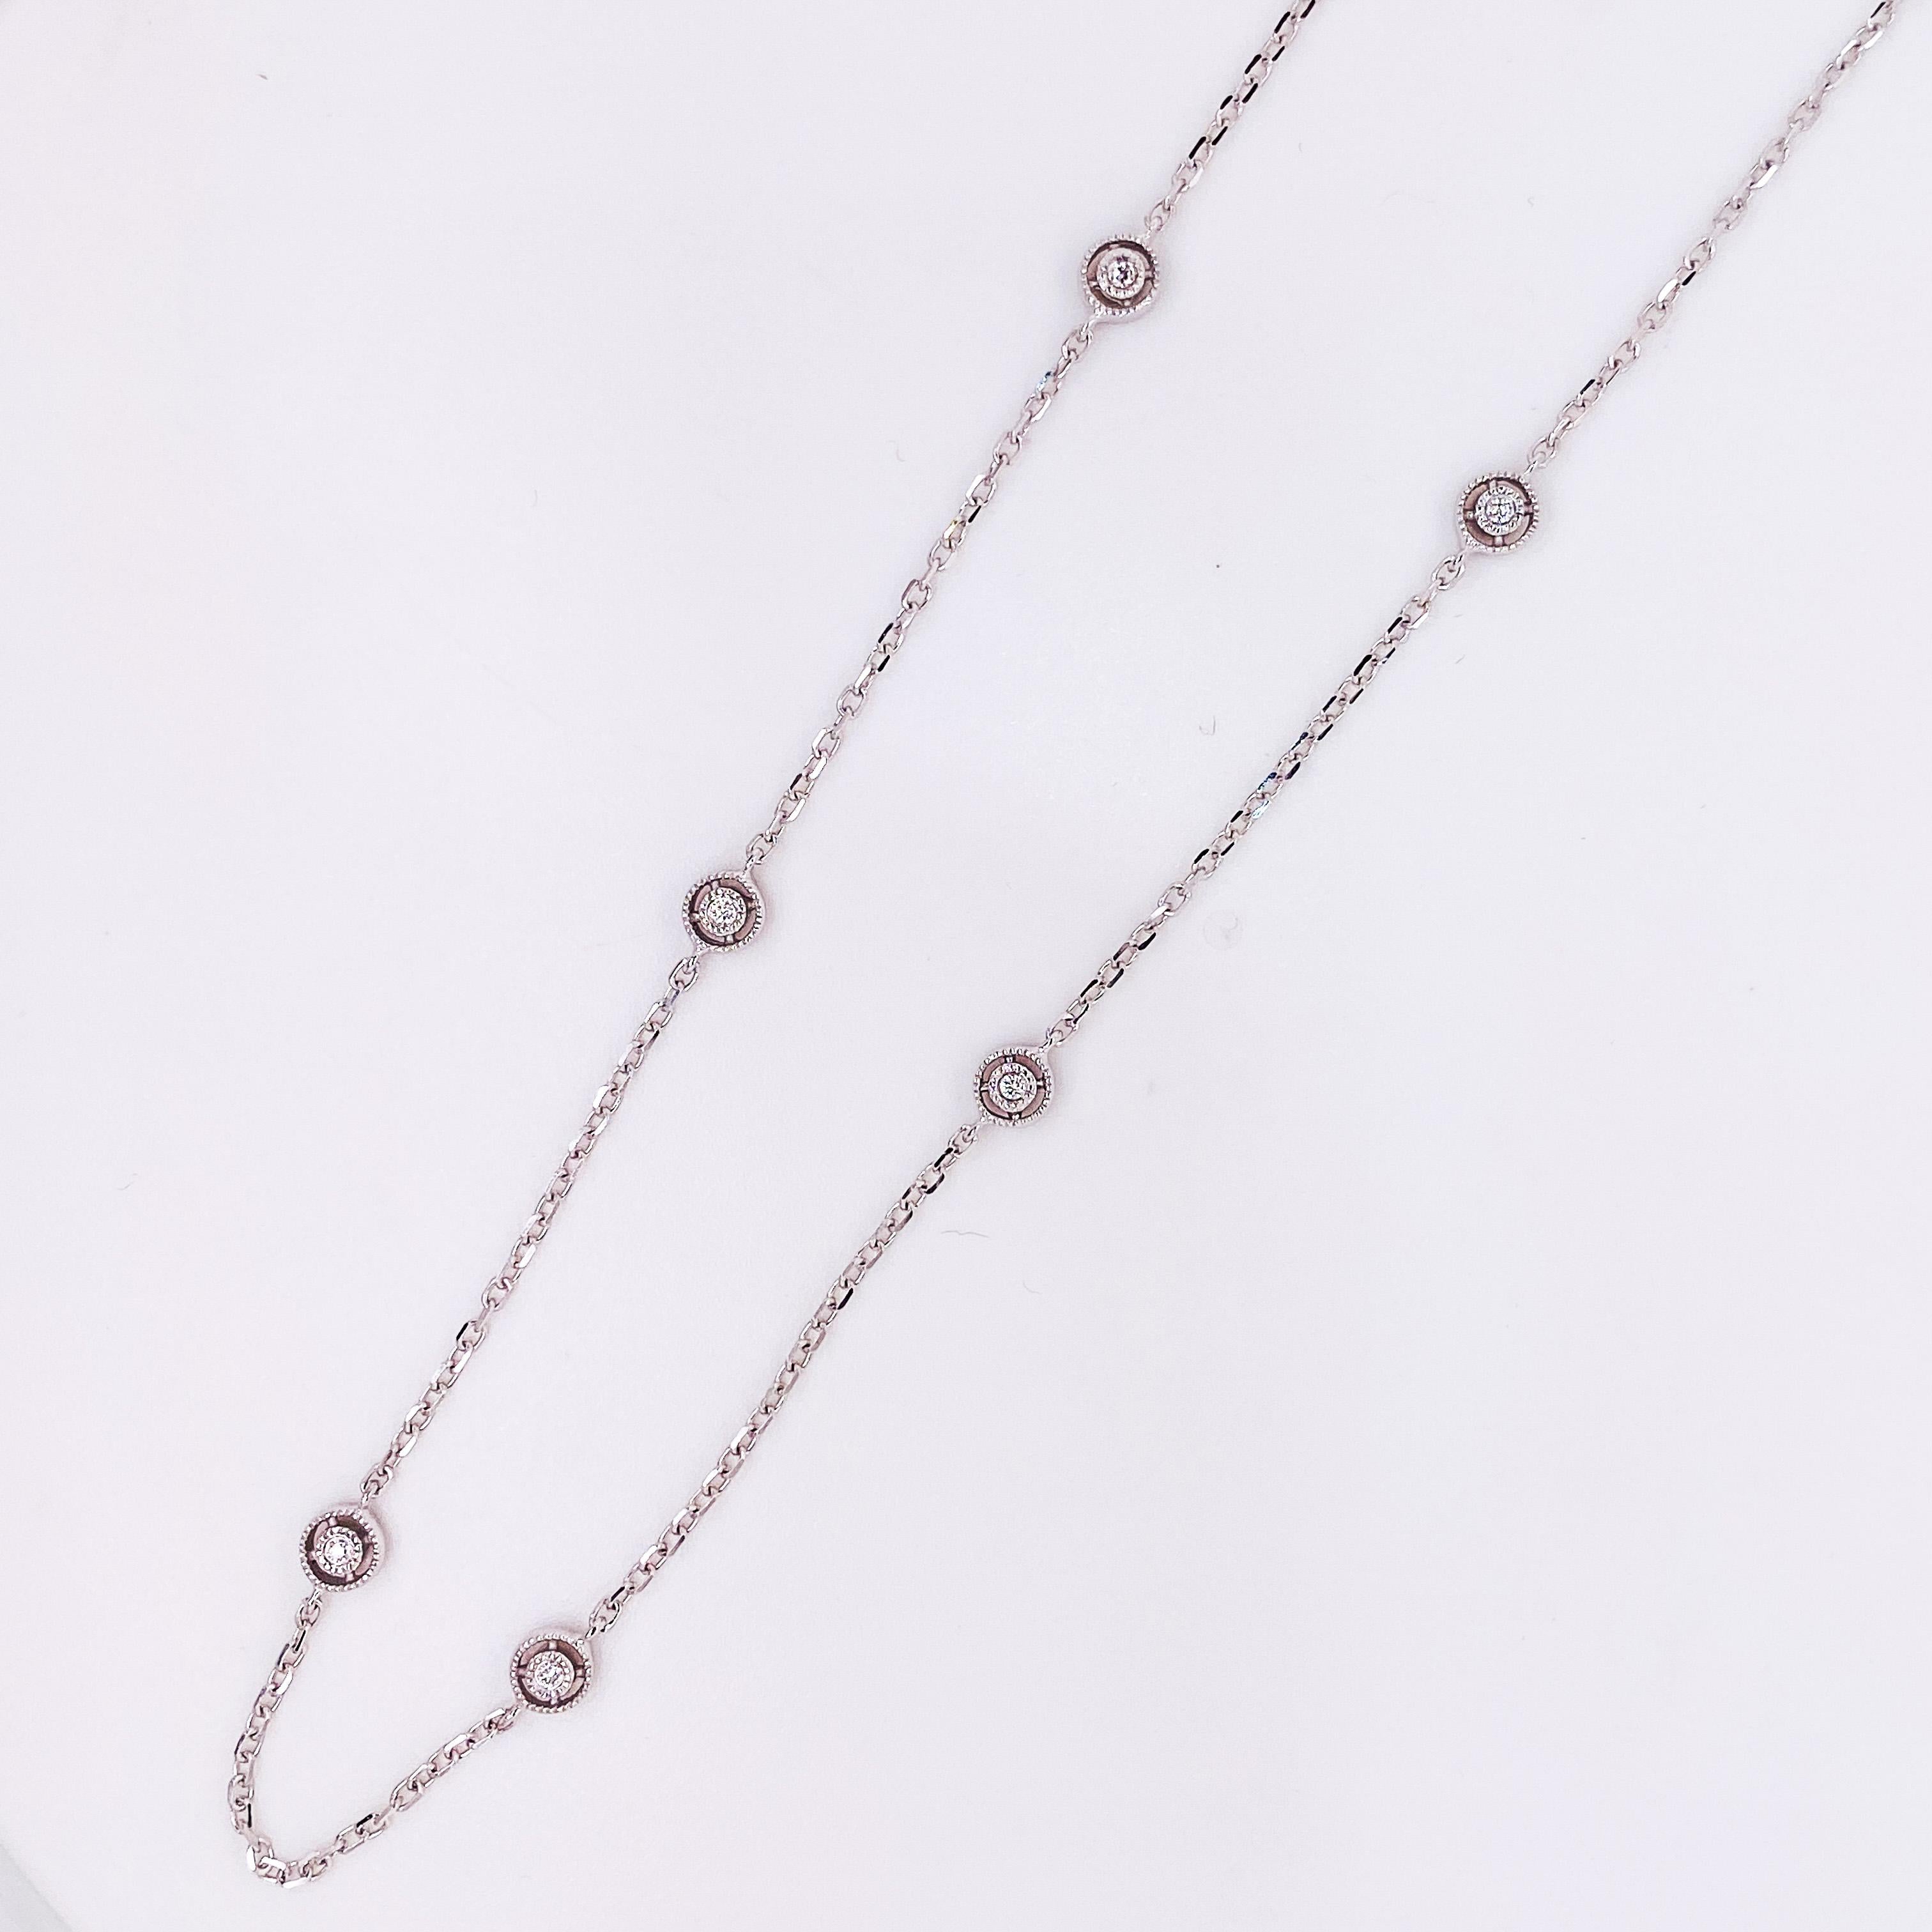 This diamonds by the yard necklace has 10 diamonds that are spaced out on a cable chain. The 18-inch chain has a unique design with a satellite design around each diamond. There is a beaded design around each diamond. The entire necklace is 14 karat